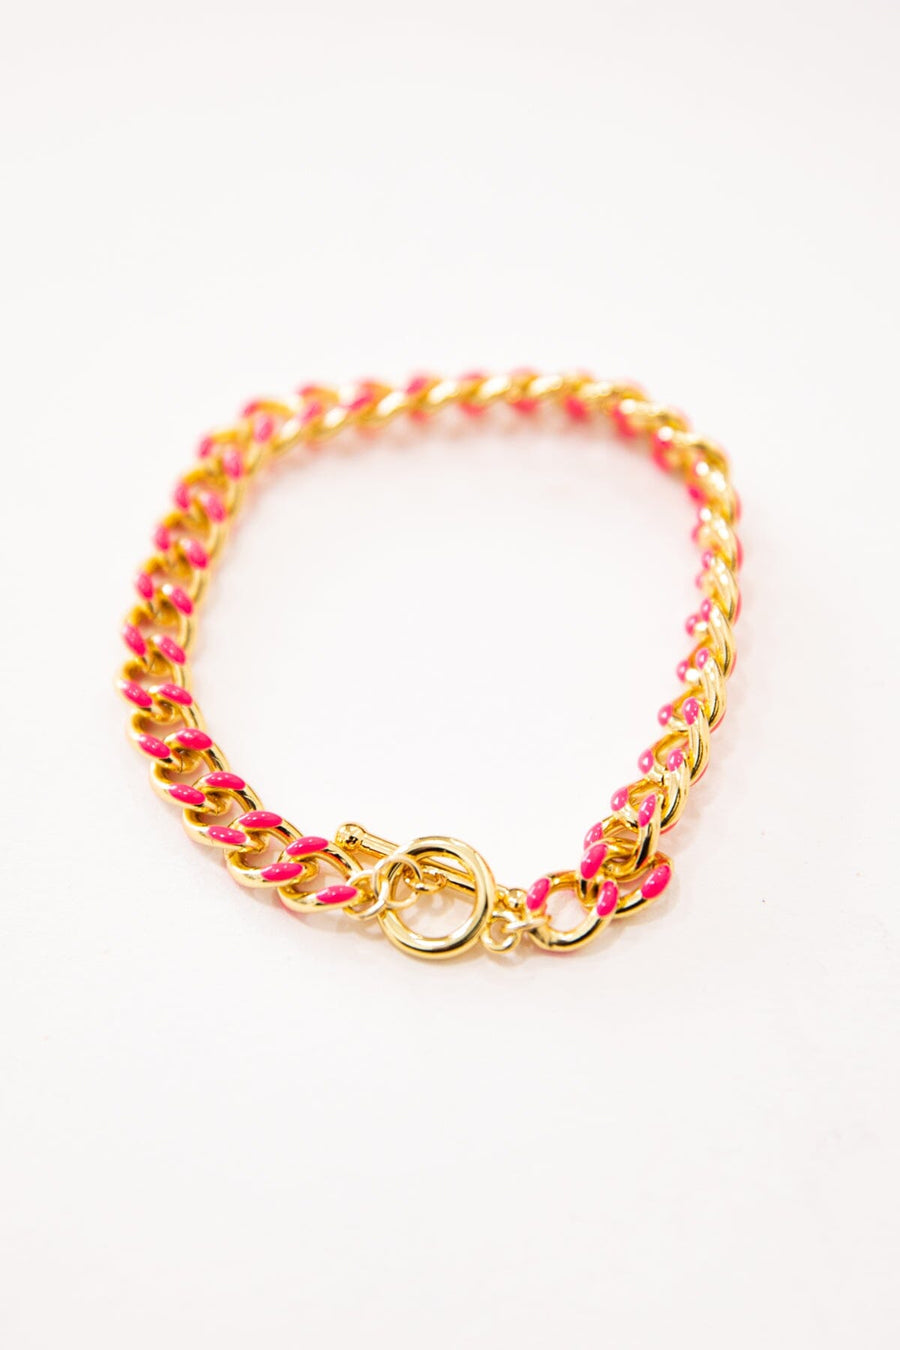 Gold and Hot Pink Enamel Chain Bracelet - Filly Flair